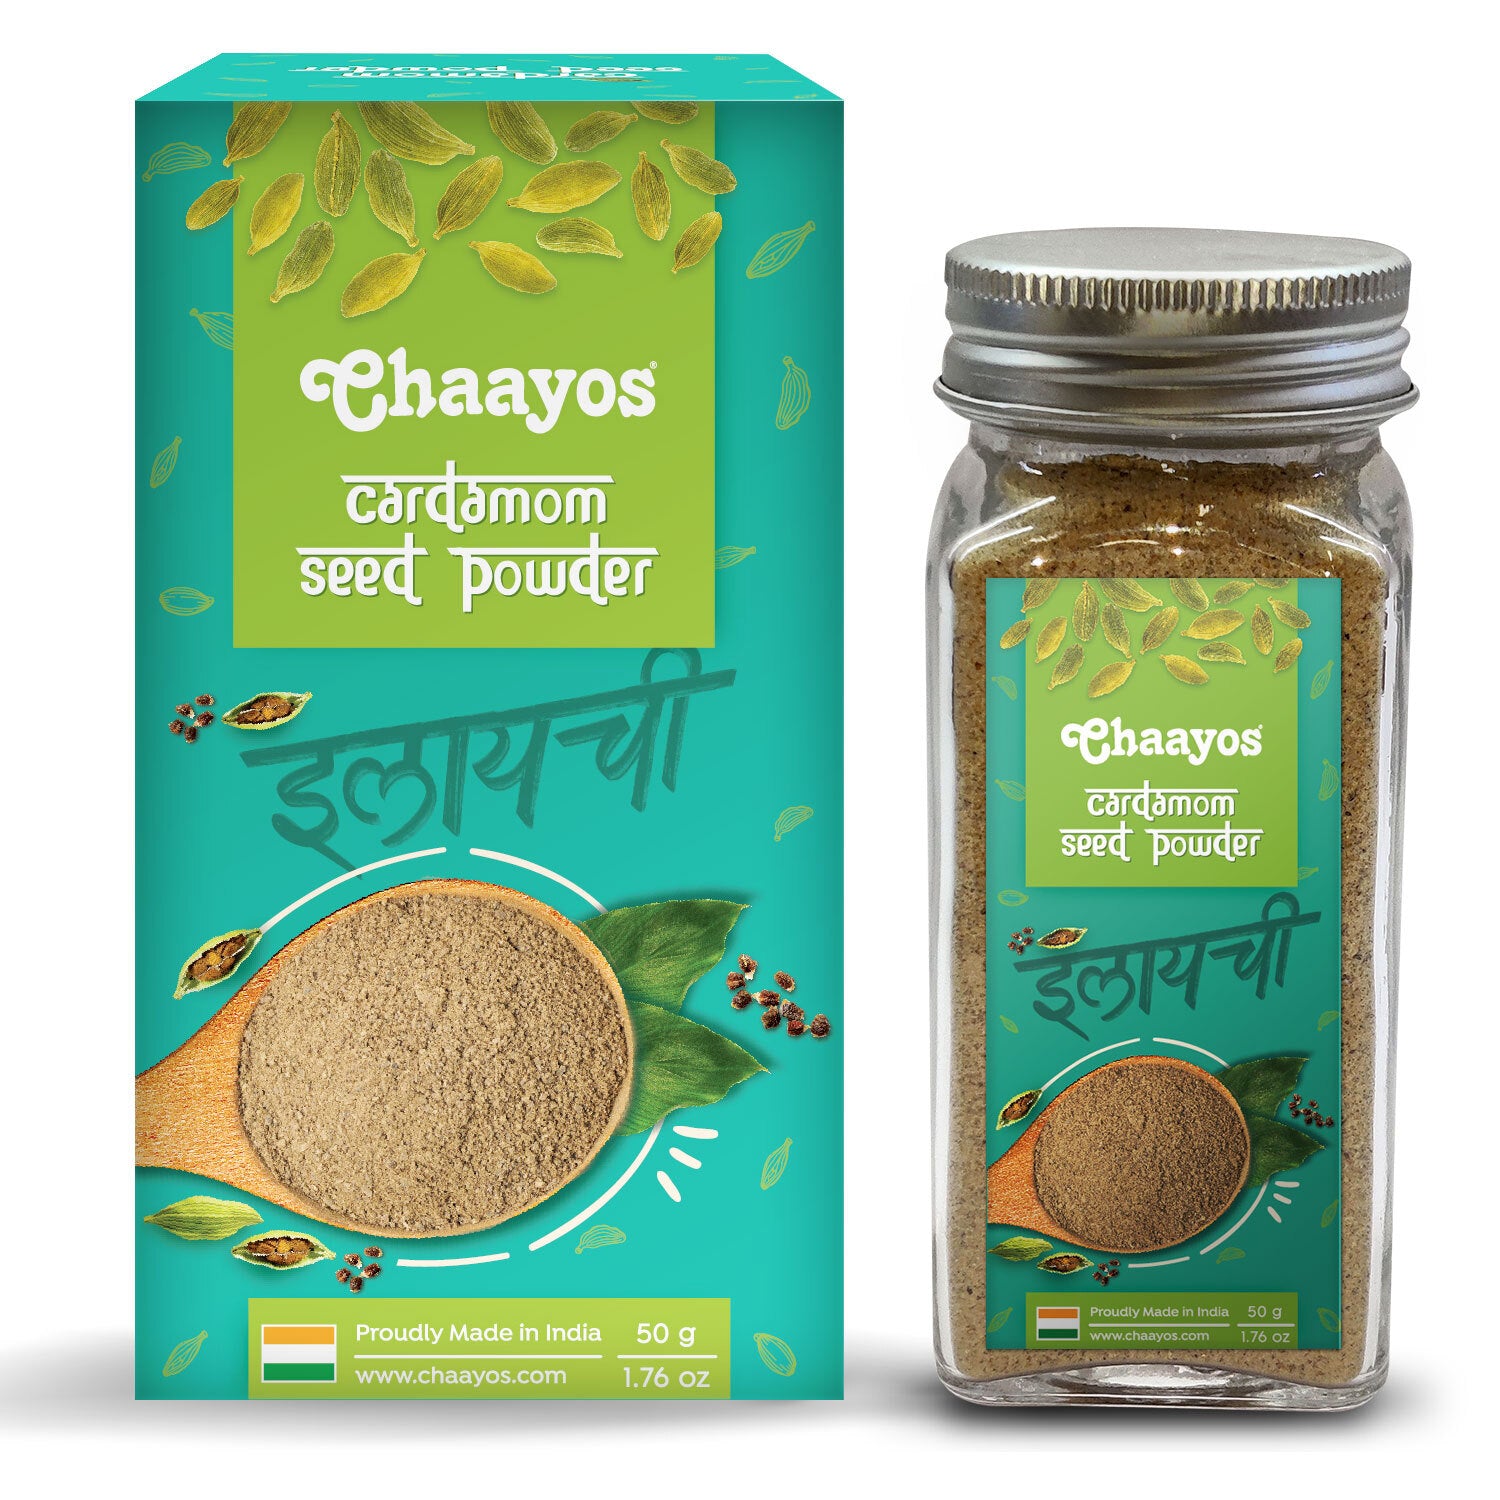 Chaayos Cardamom Seed Powder (50g) | Only Seeds No Husk | 100% Natural Spice